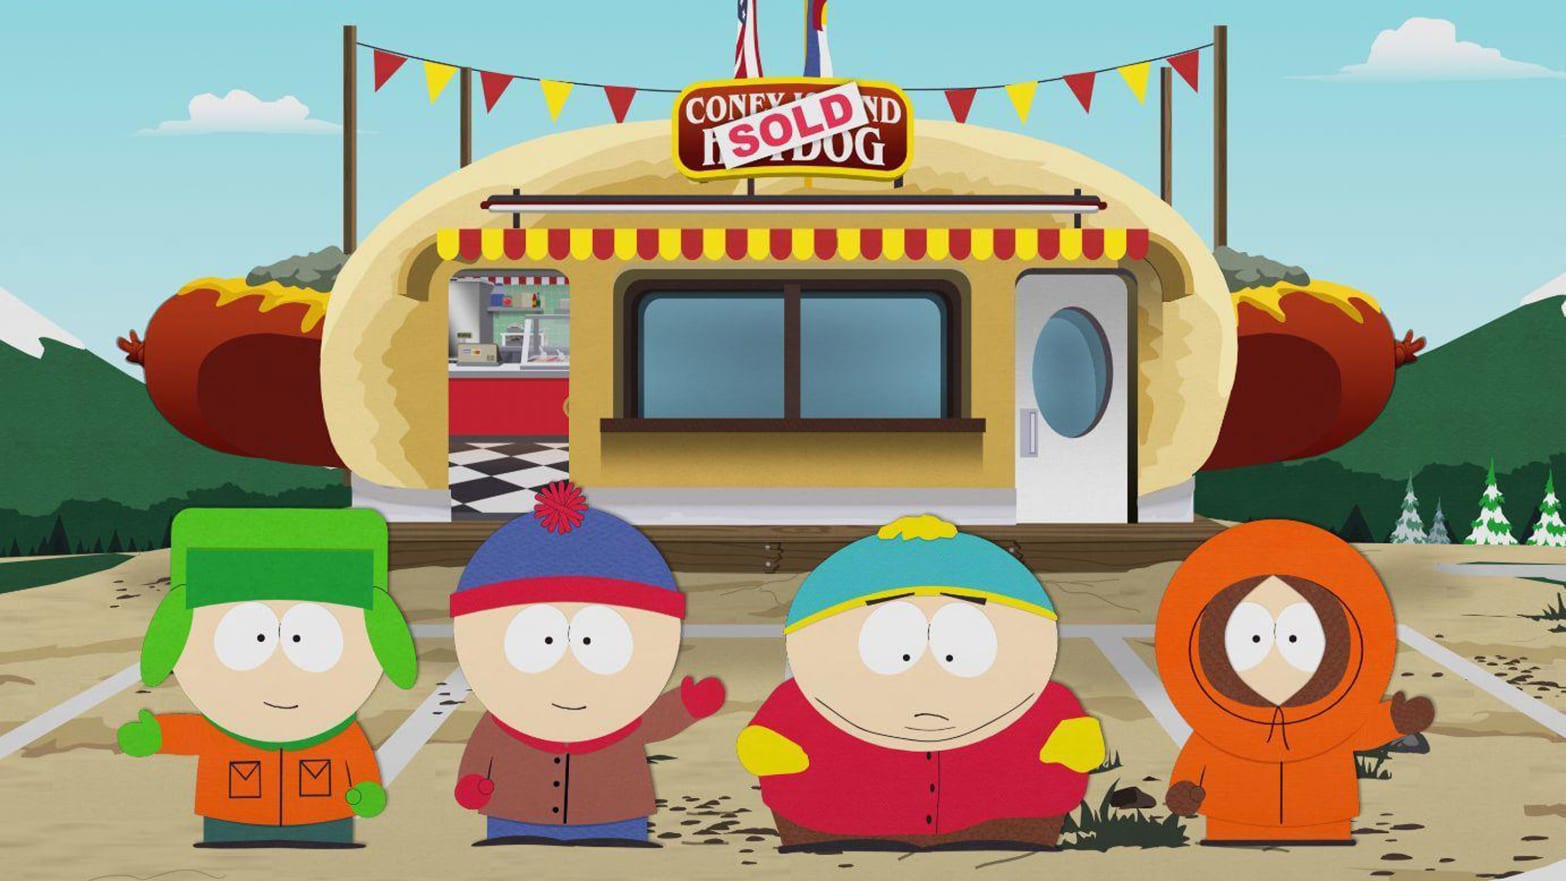 South Park' Takes on the Streaming Wars in Latest Half-Baked Movie